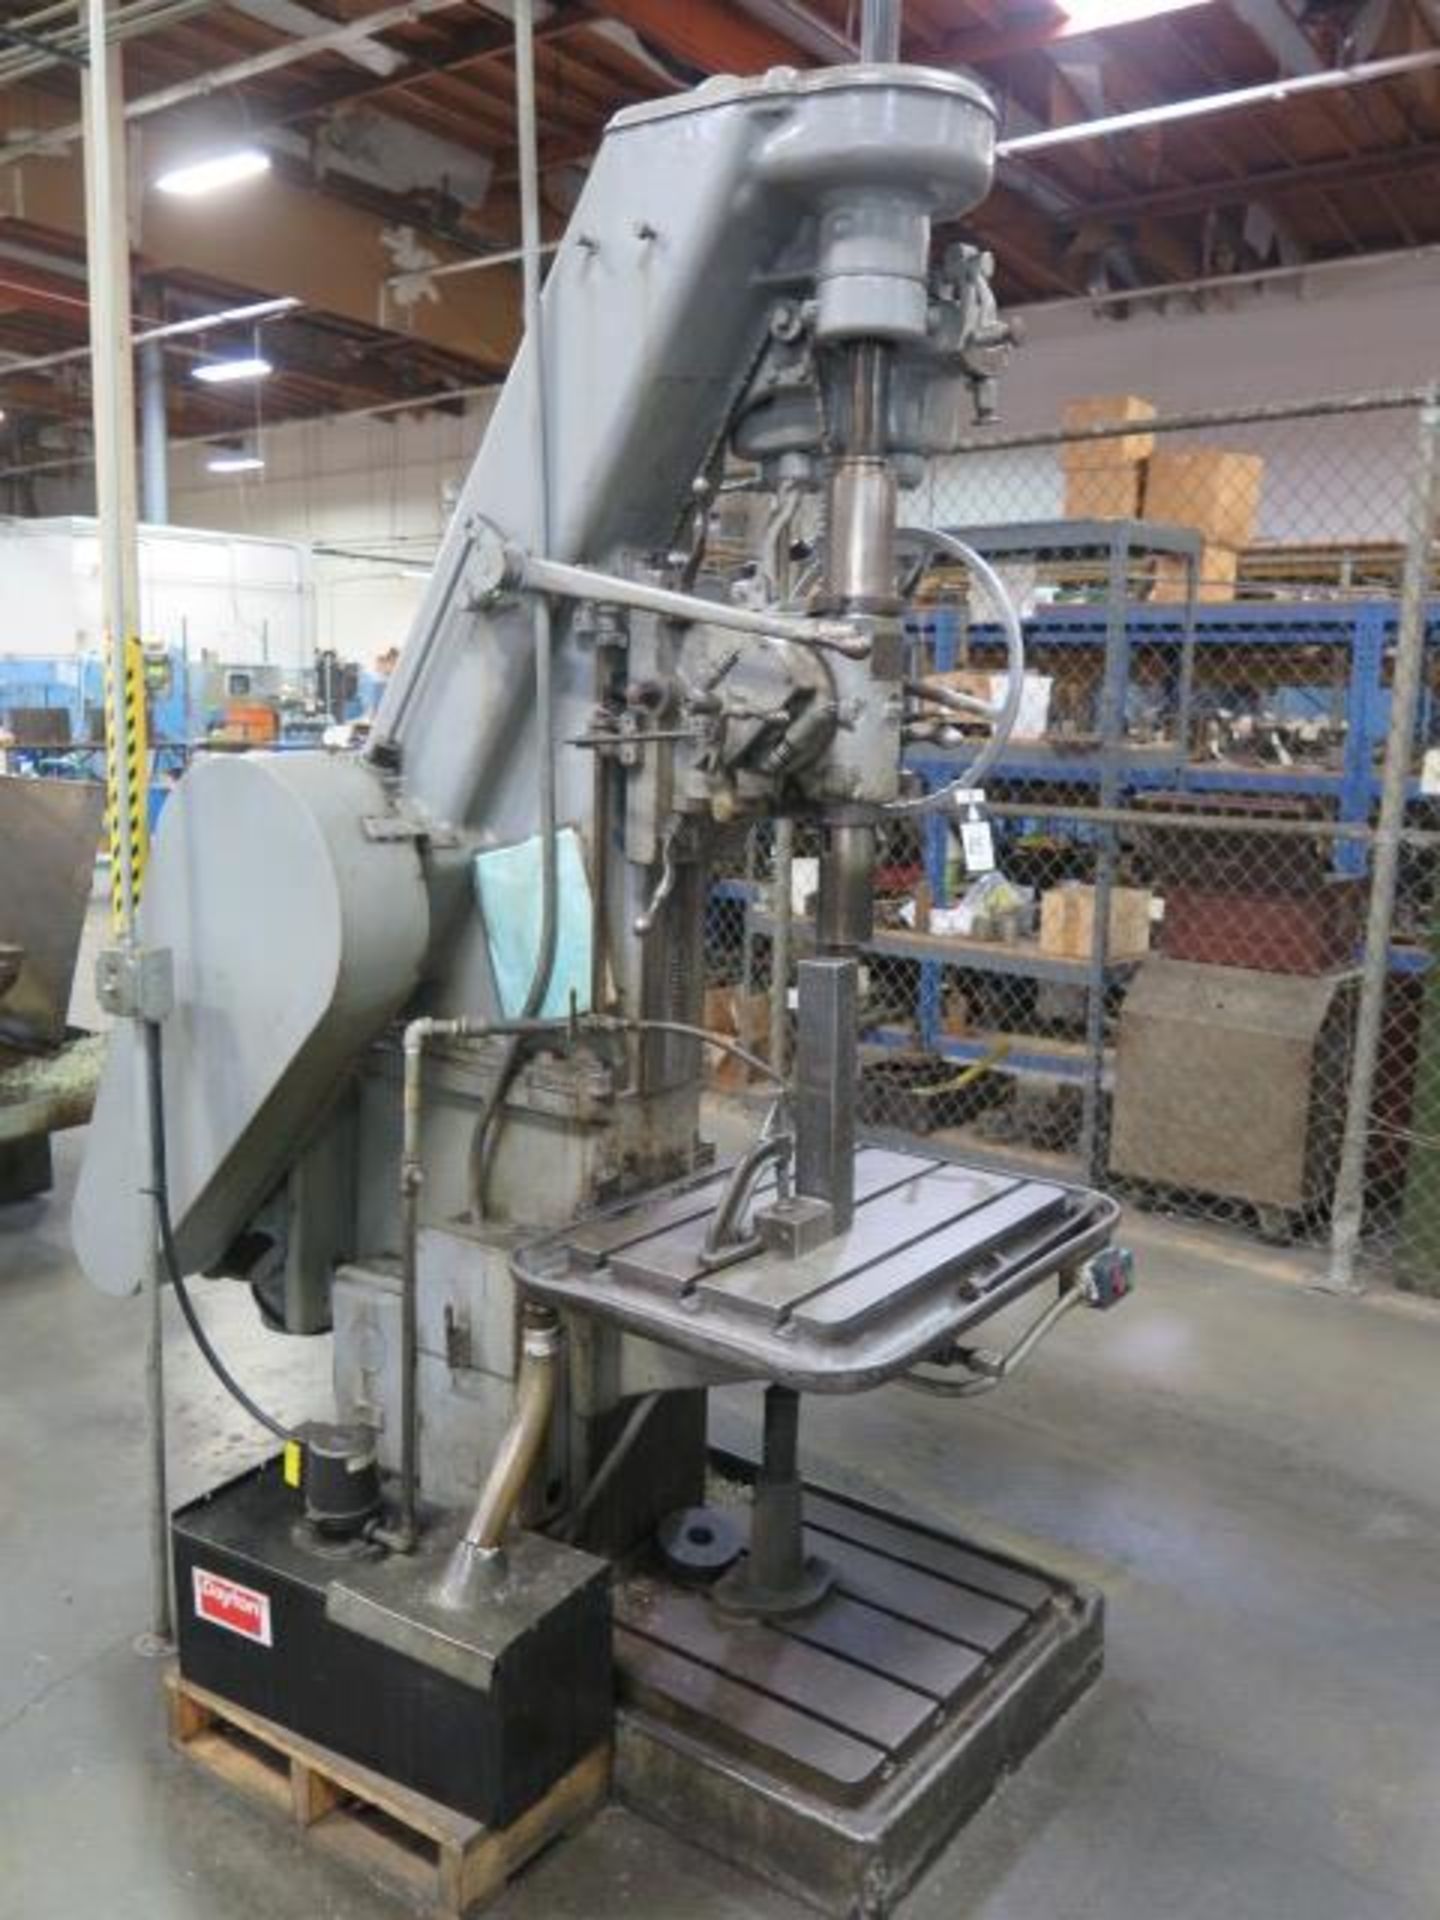 Barnes No. 262 Sliding Head Drill w/ 90-500 Geared RPM, Power Feed, 18" x 28" Table, SOLD AS IS - Image 3 of 7